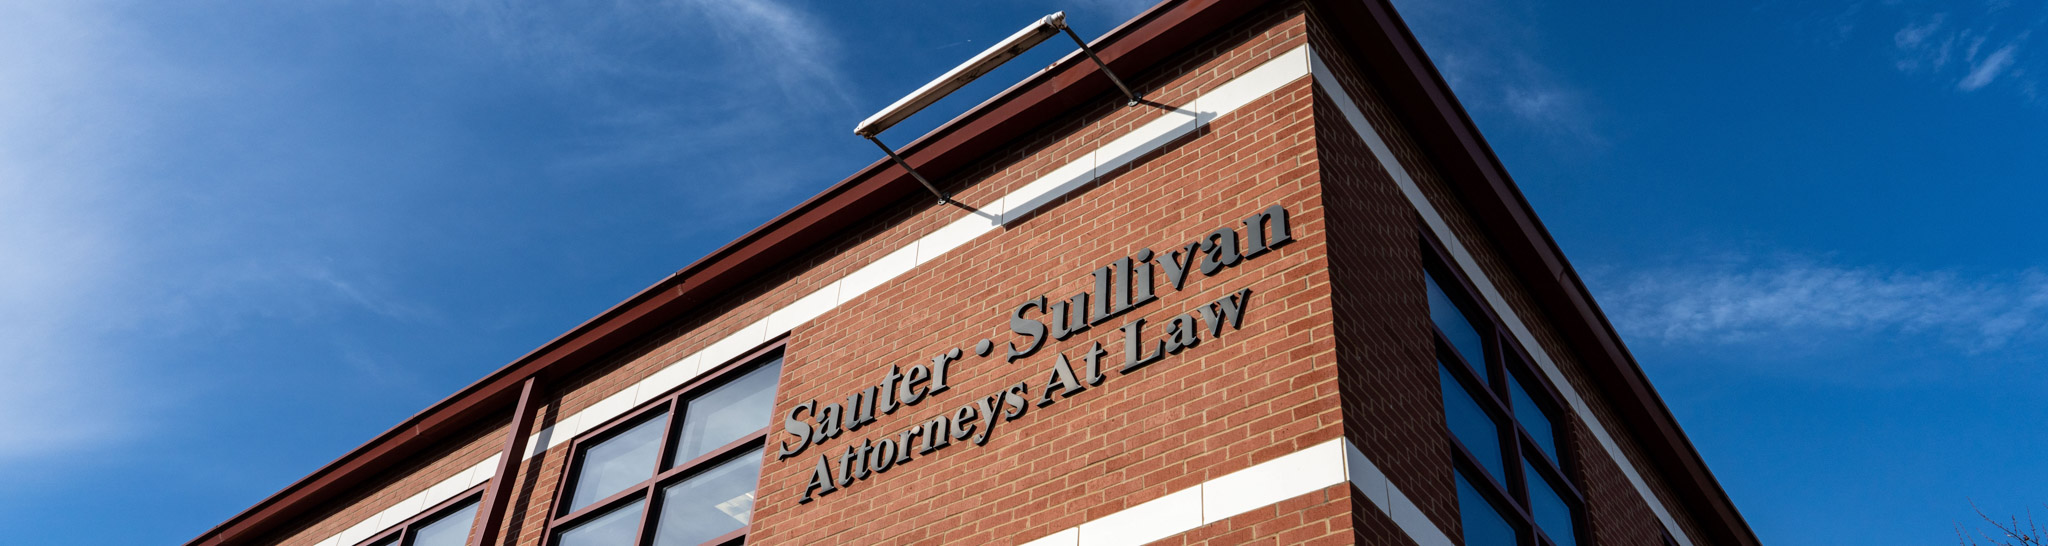 Sauter Sullivan Attorneys at Law building sign attached to brick wall